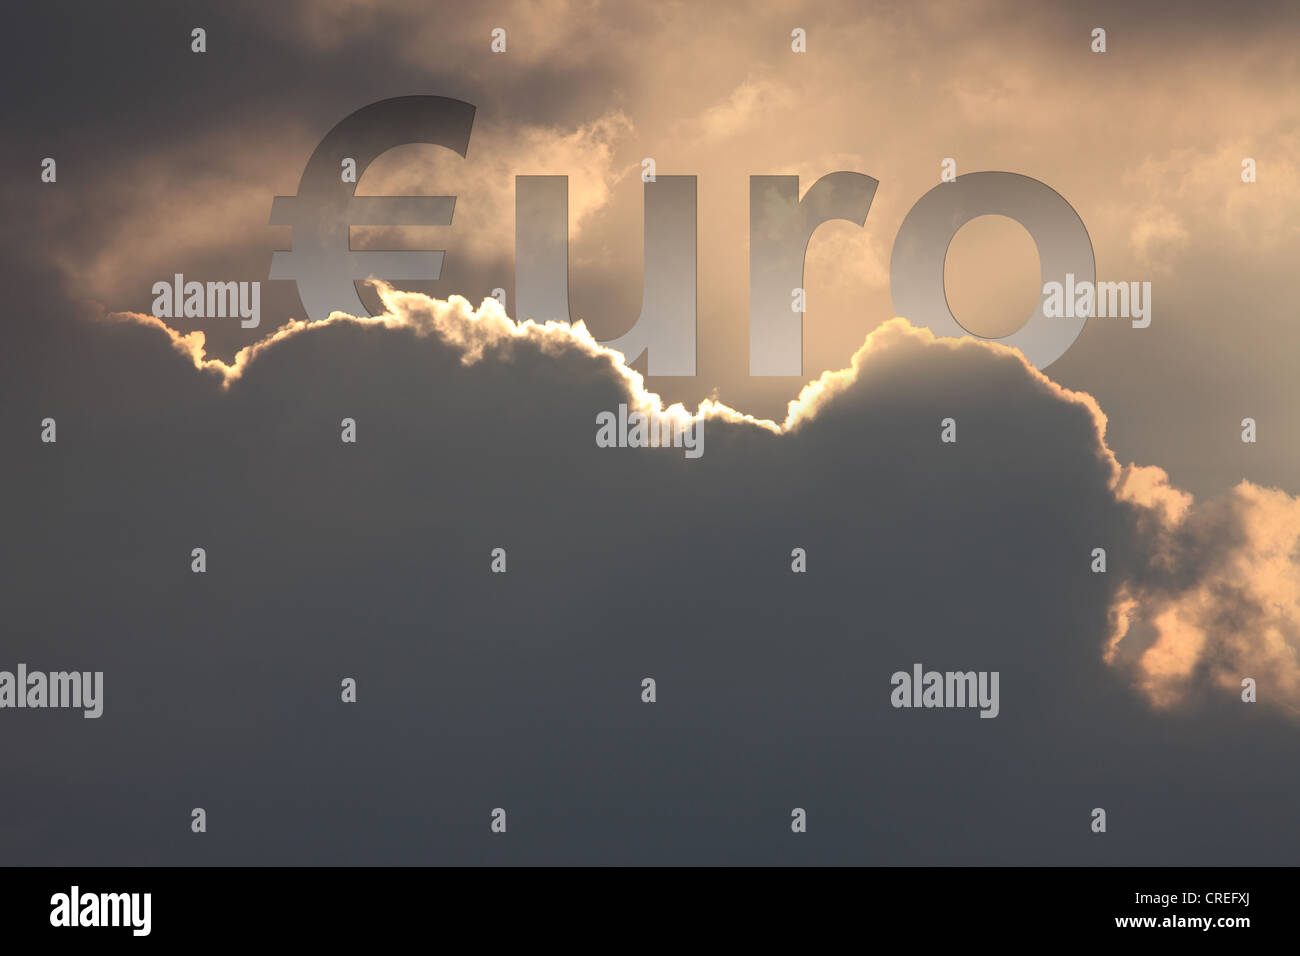 Euro Rising/Sinking Behind Storm Clouds Stock Photo